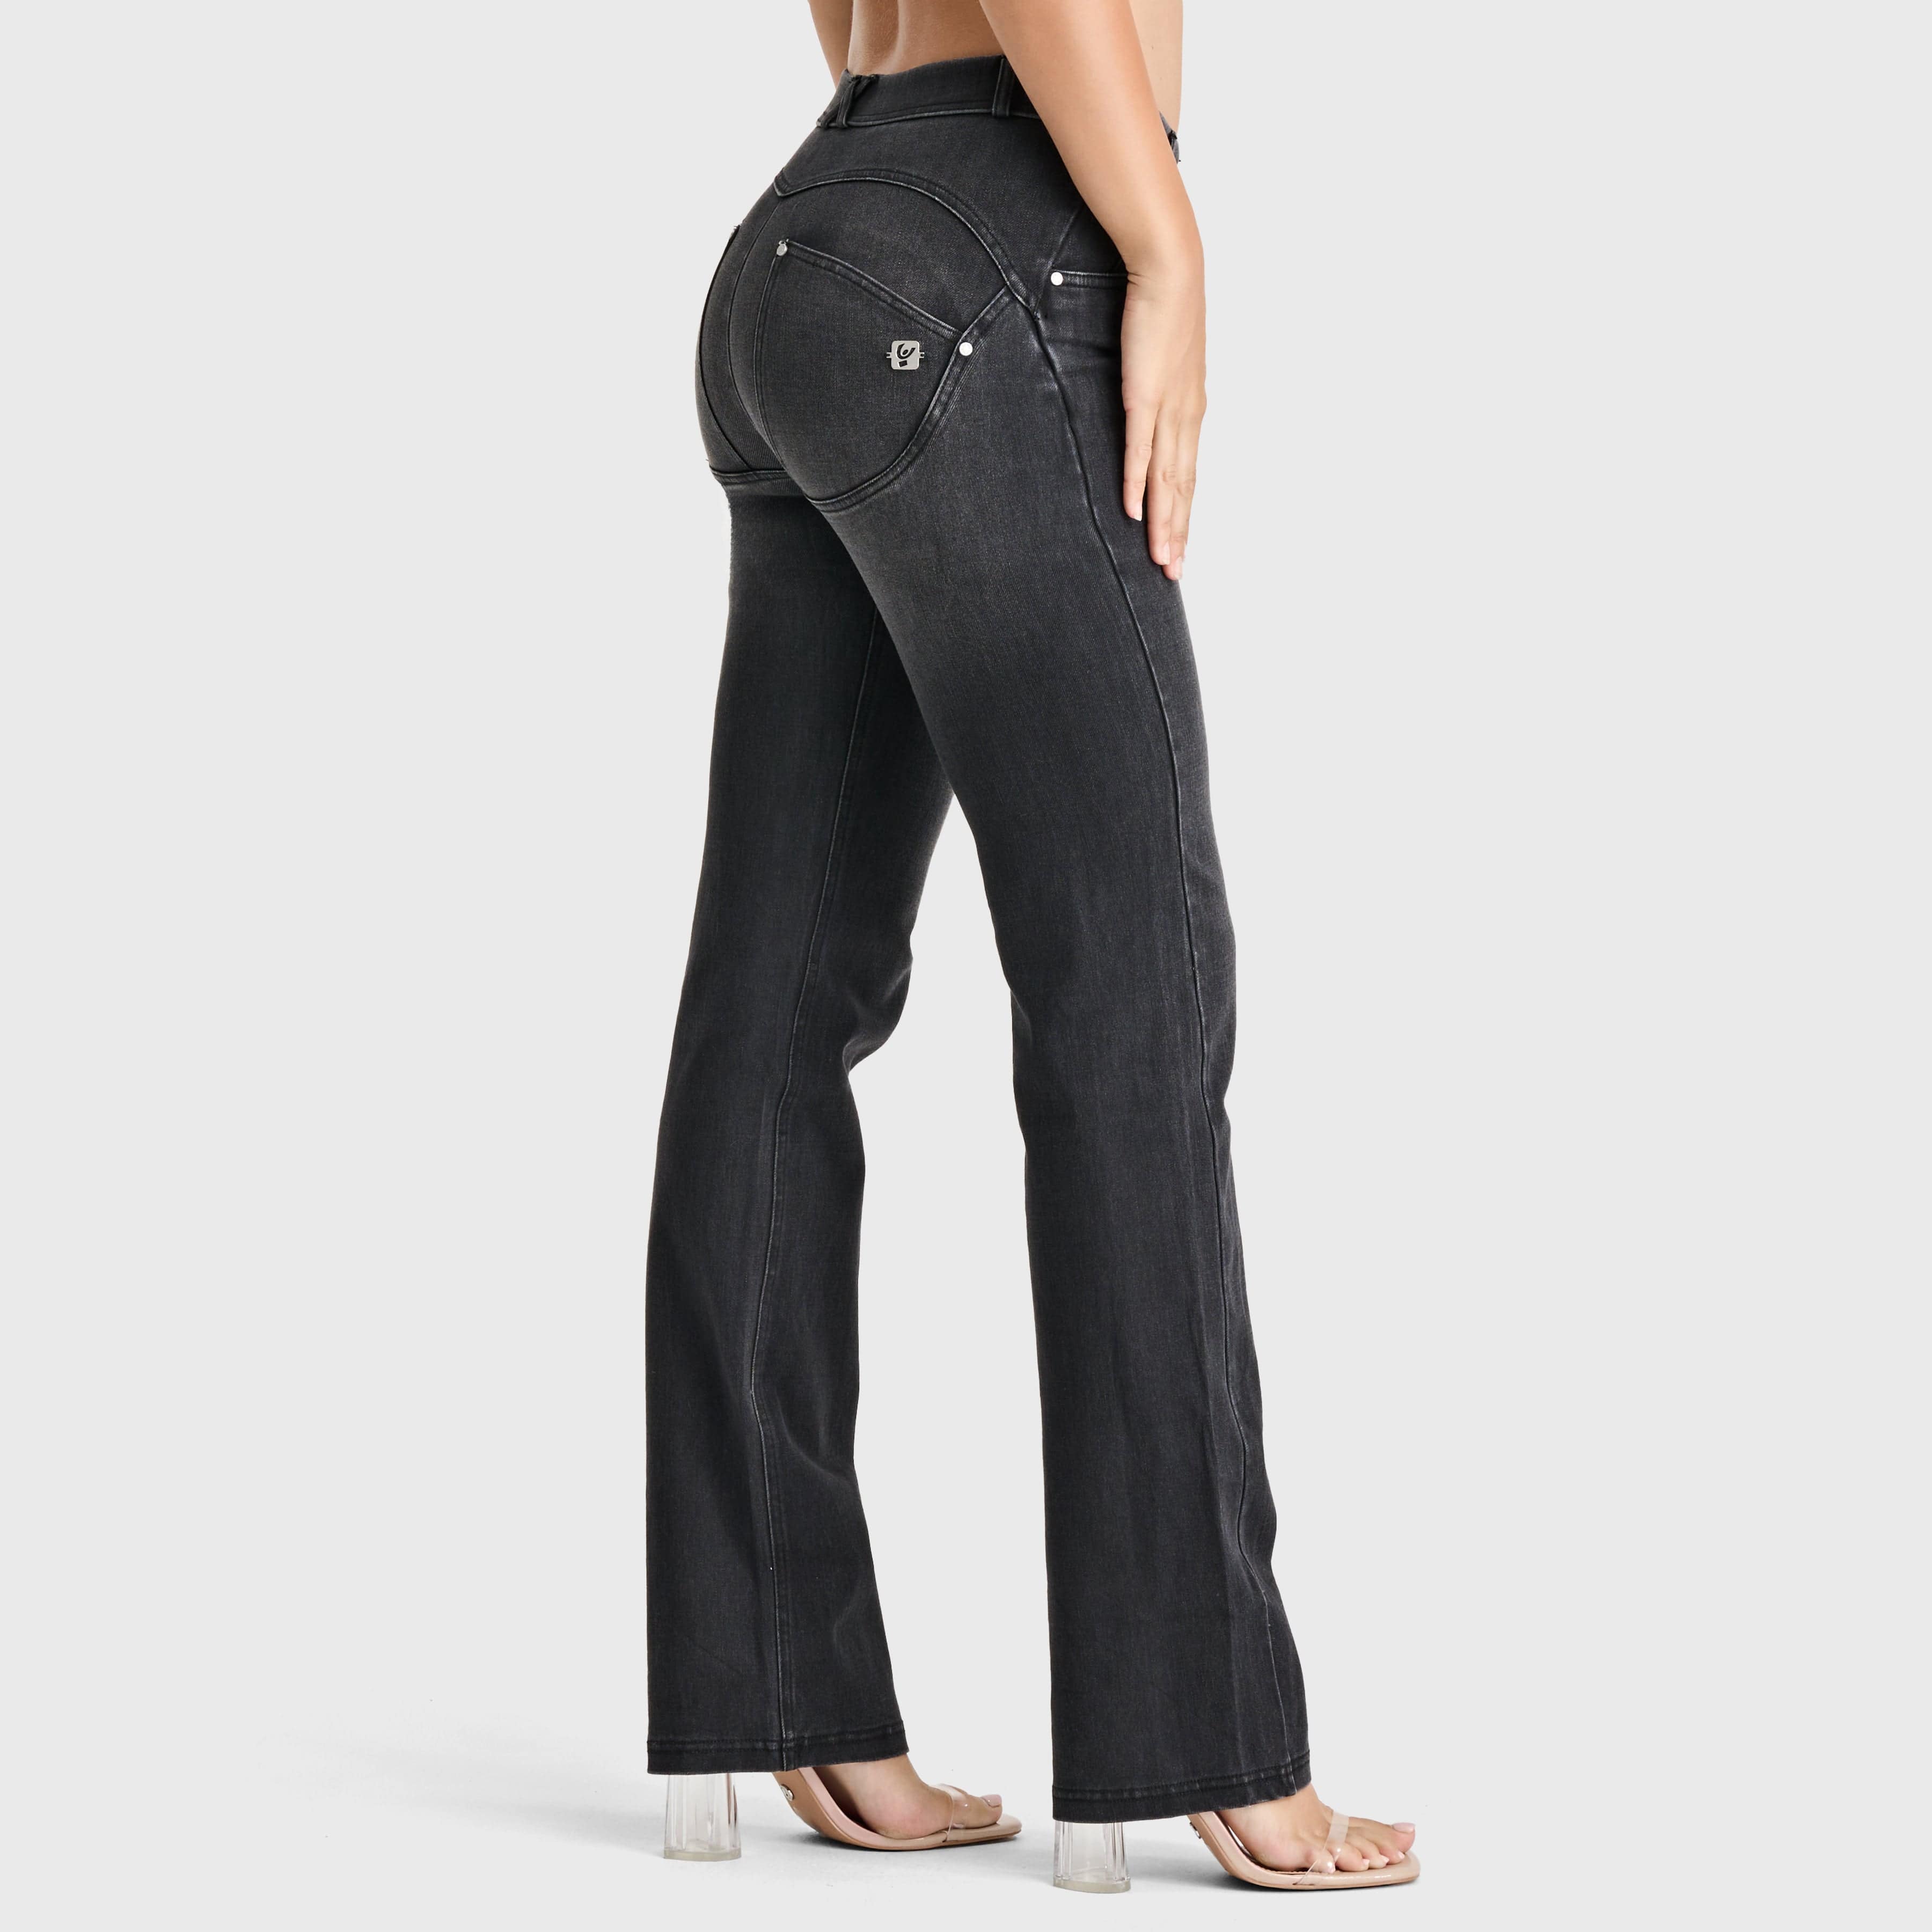 WR.UP® SNUG Jeans - 2 Button High Waisted - Bootcut - Black + Black Stitching 3